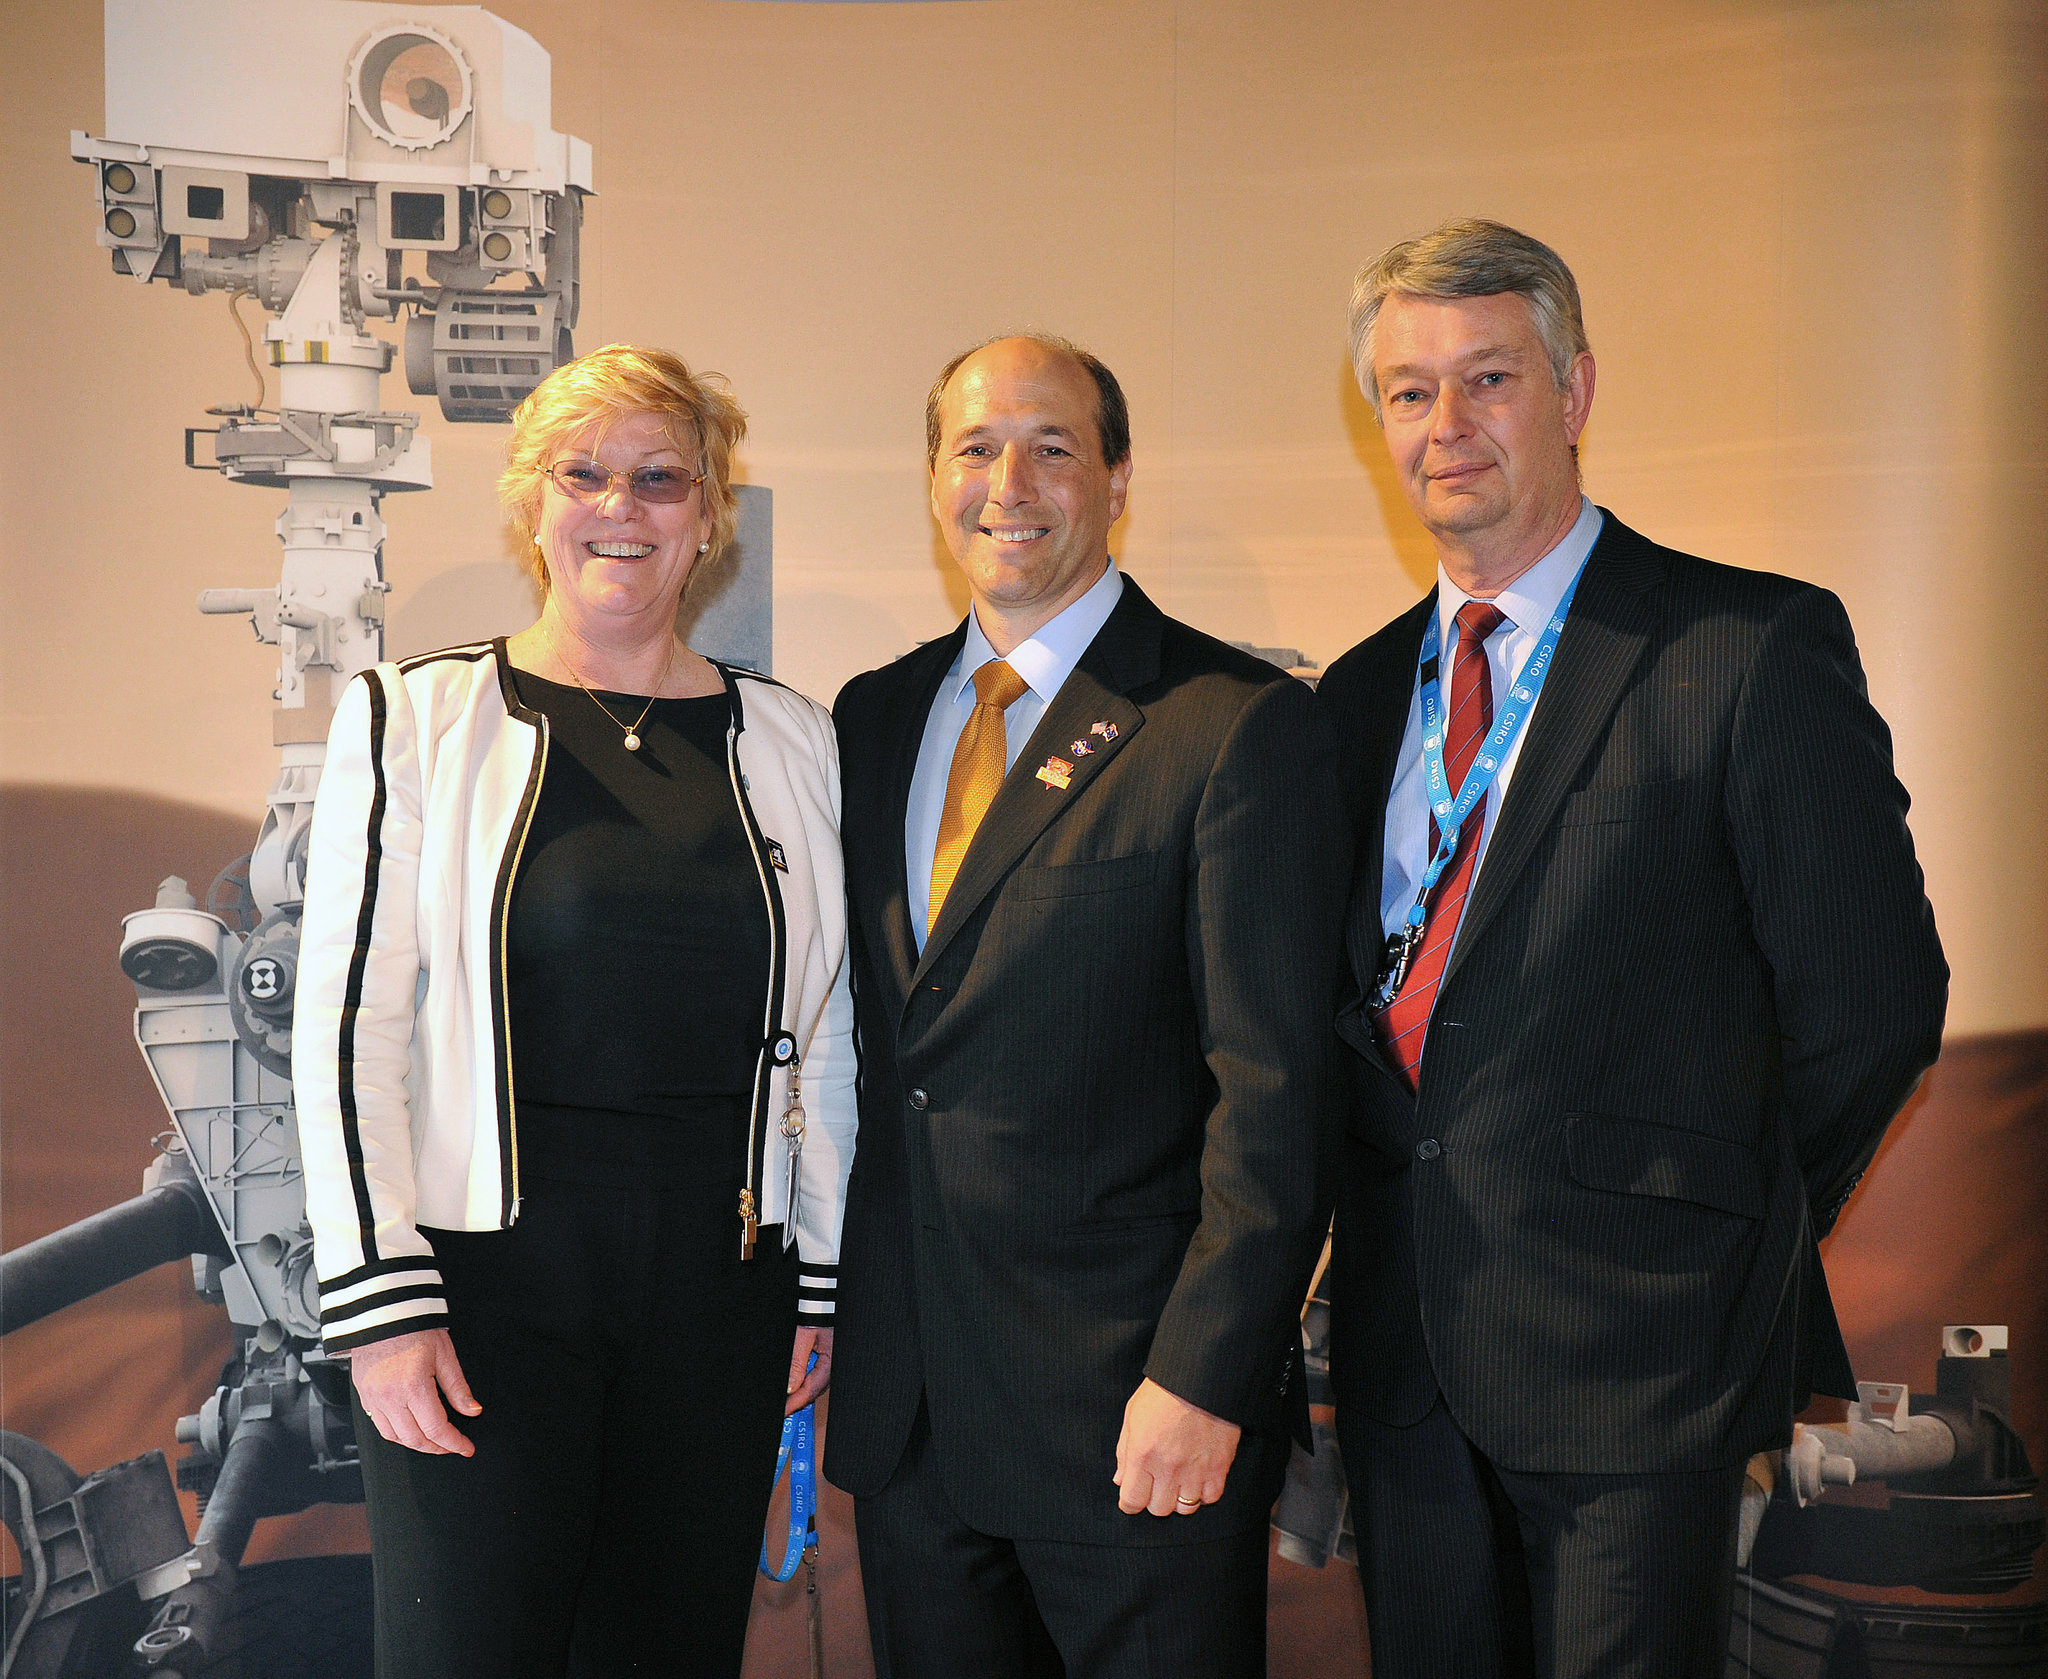 Megan Clark in Deep Space Communication Complex of & # 39; Canberra in 2012 with its director, Ed Kruzins, right, and then US ambassador Jeffrey L. Bleich.